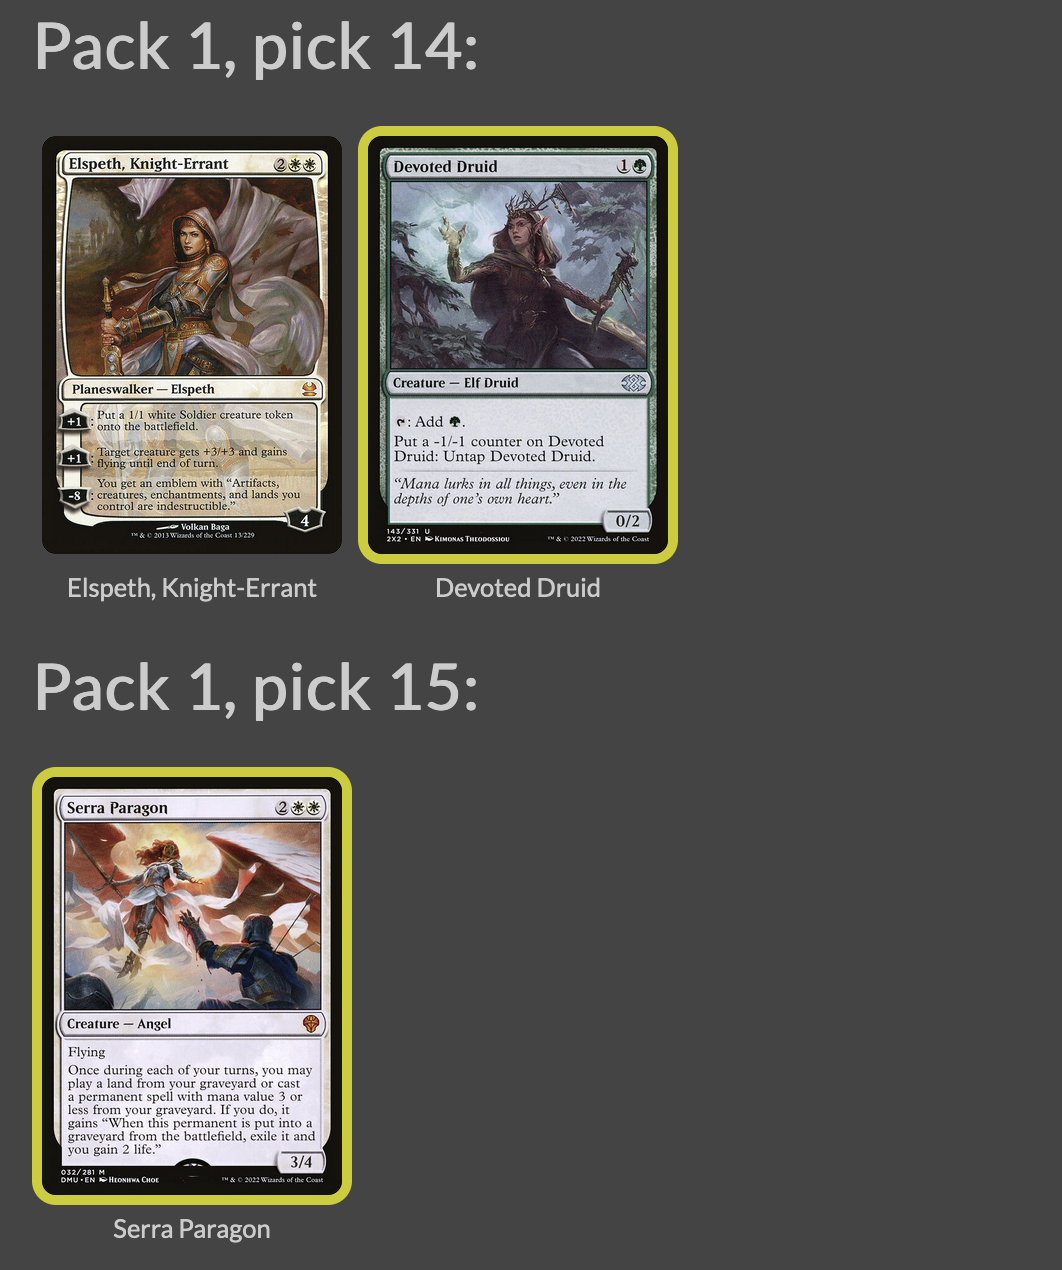 Pick 1, Packs 14 and 15